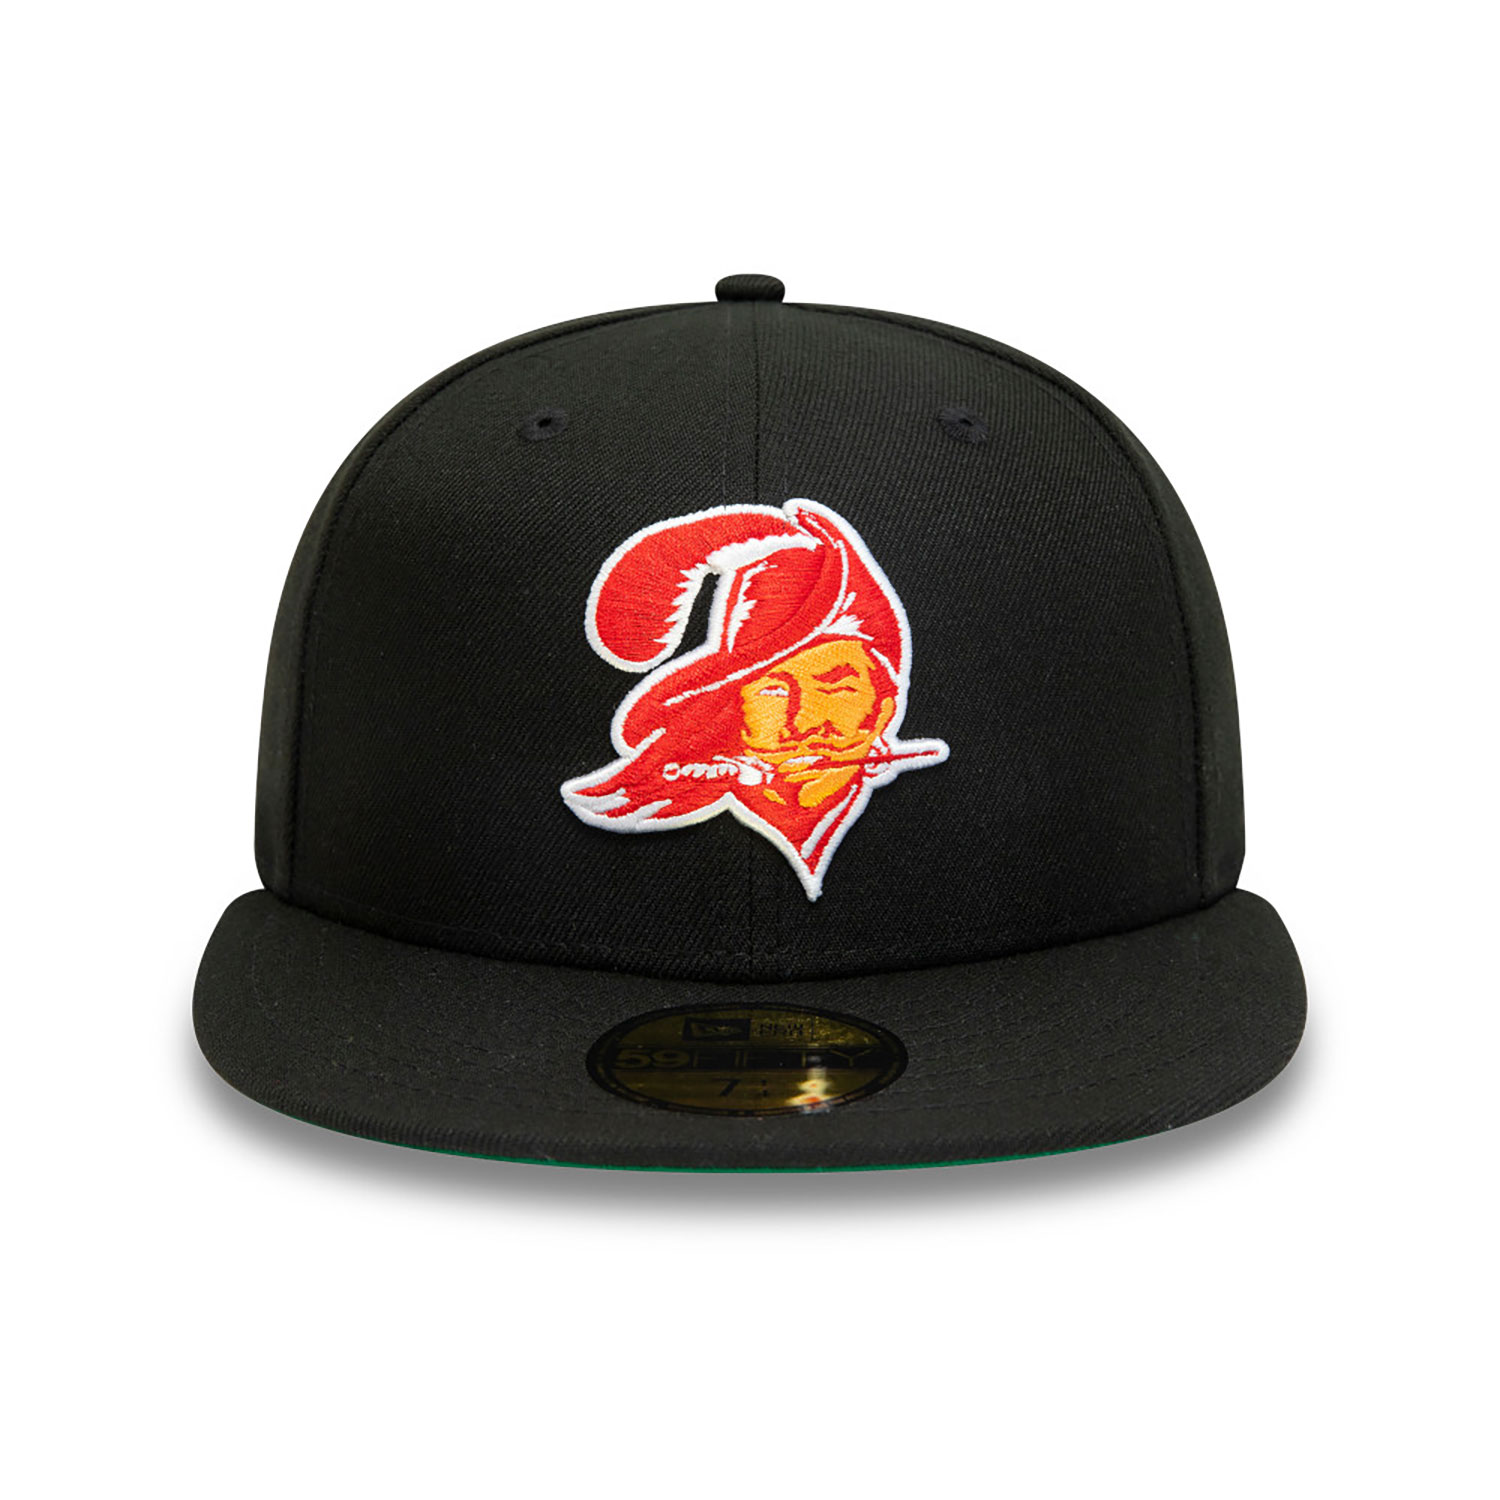 Tampa Bay Buccaneers NFL Variety Black 59FIFTY Fitted Cap